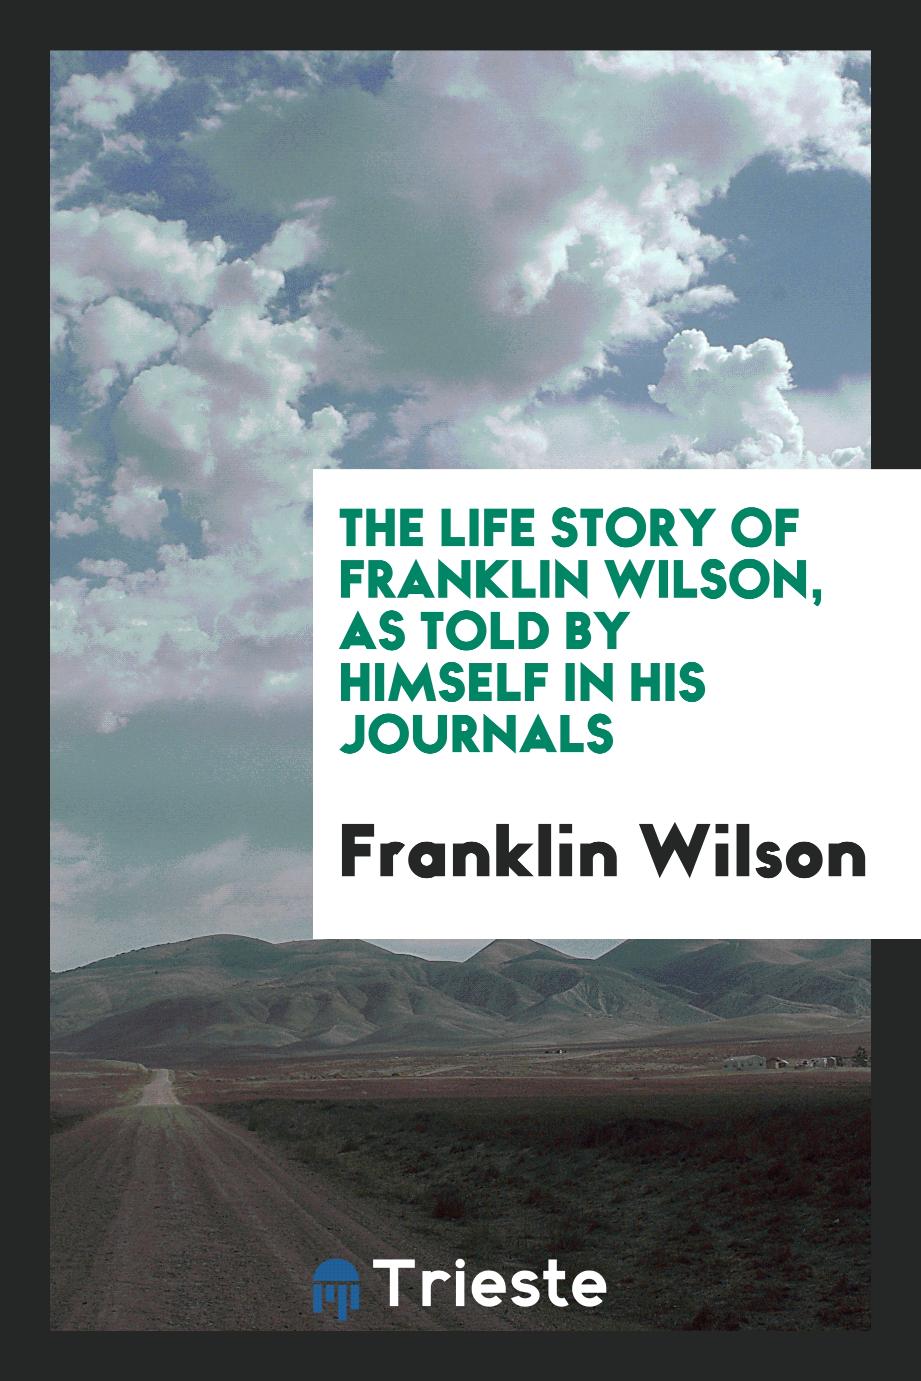 The Life Story of Franklin Wilson, As Told by Himself in His Journals